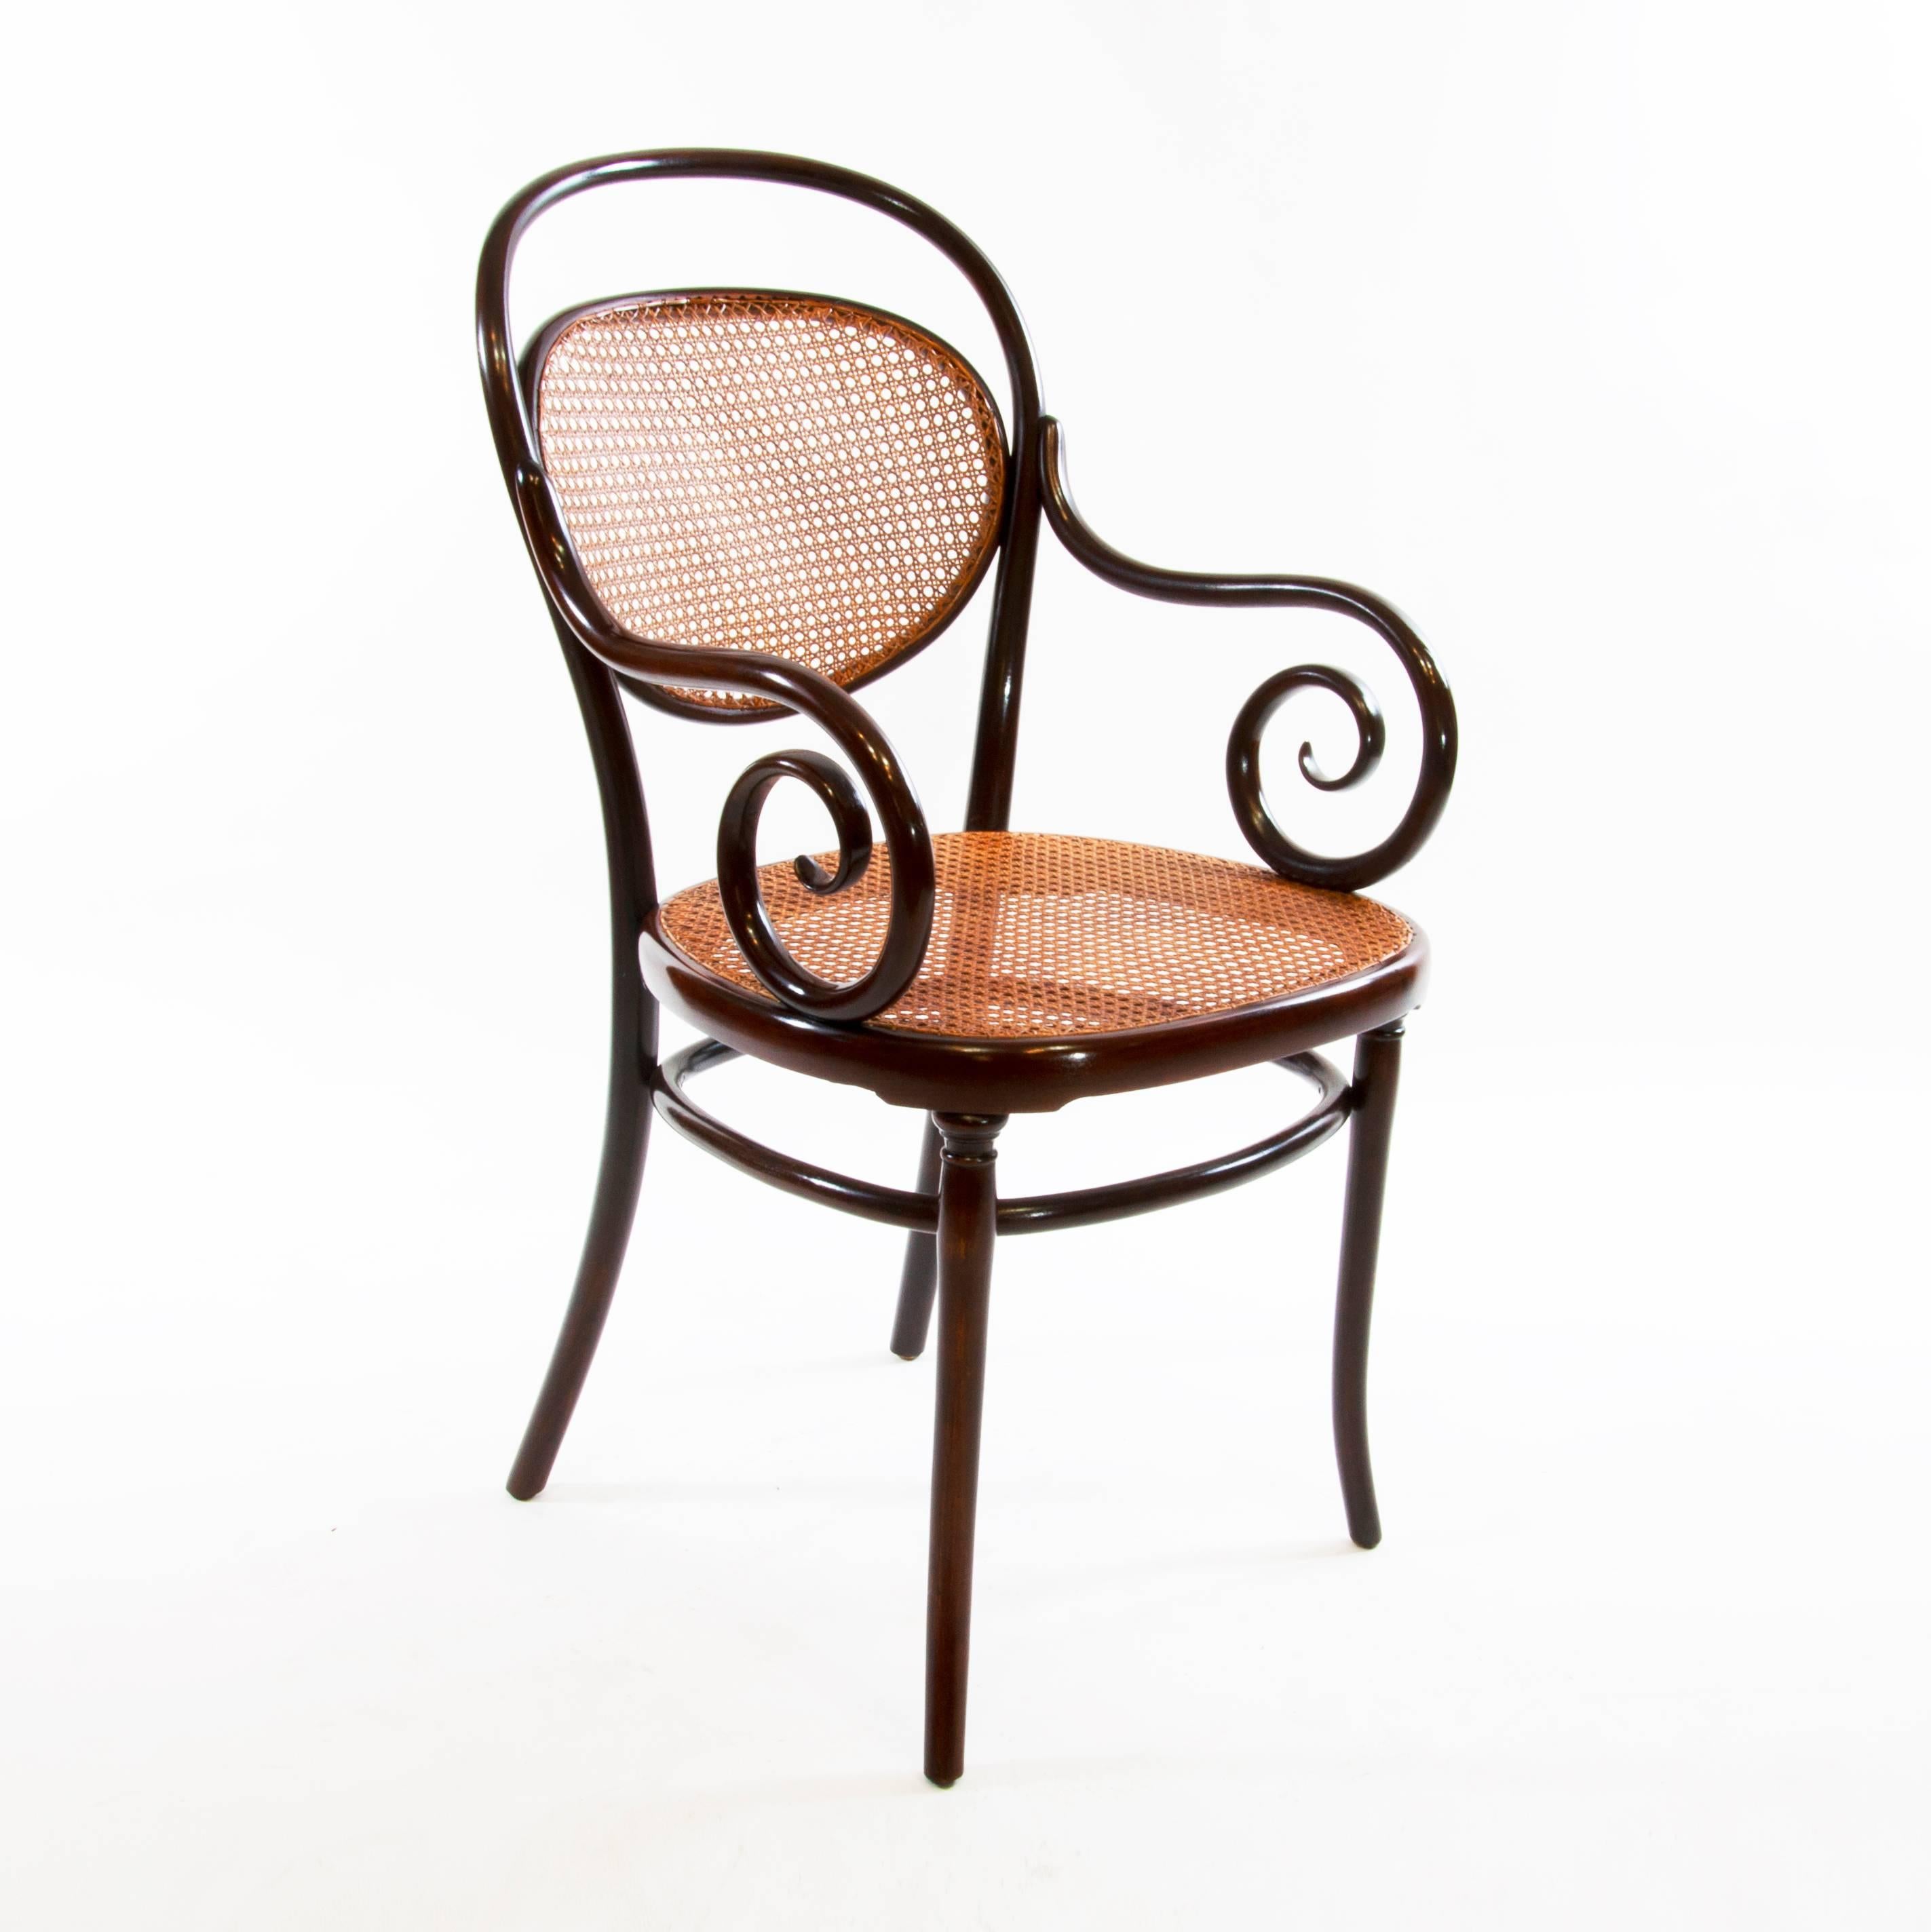 Mid-19th Century Antique Thonet Bentwood Armchair Fauteuil No. 11 For Sale